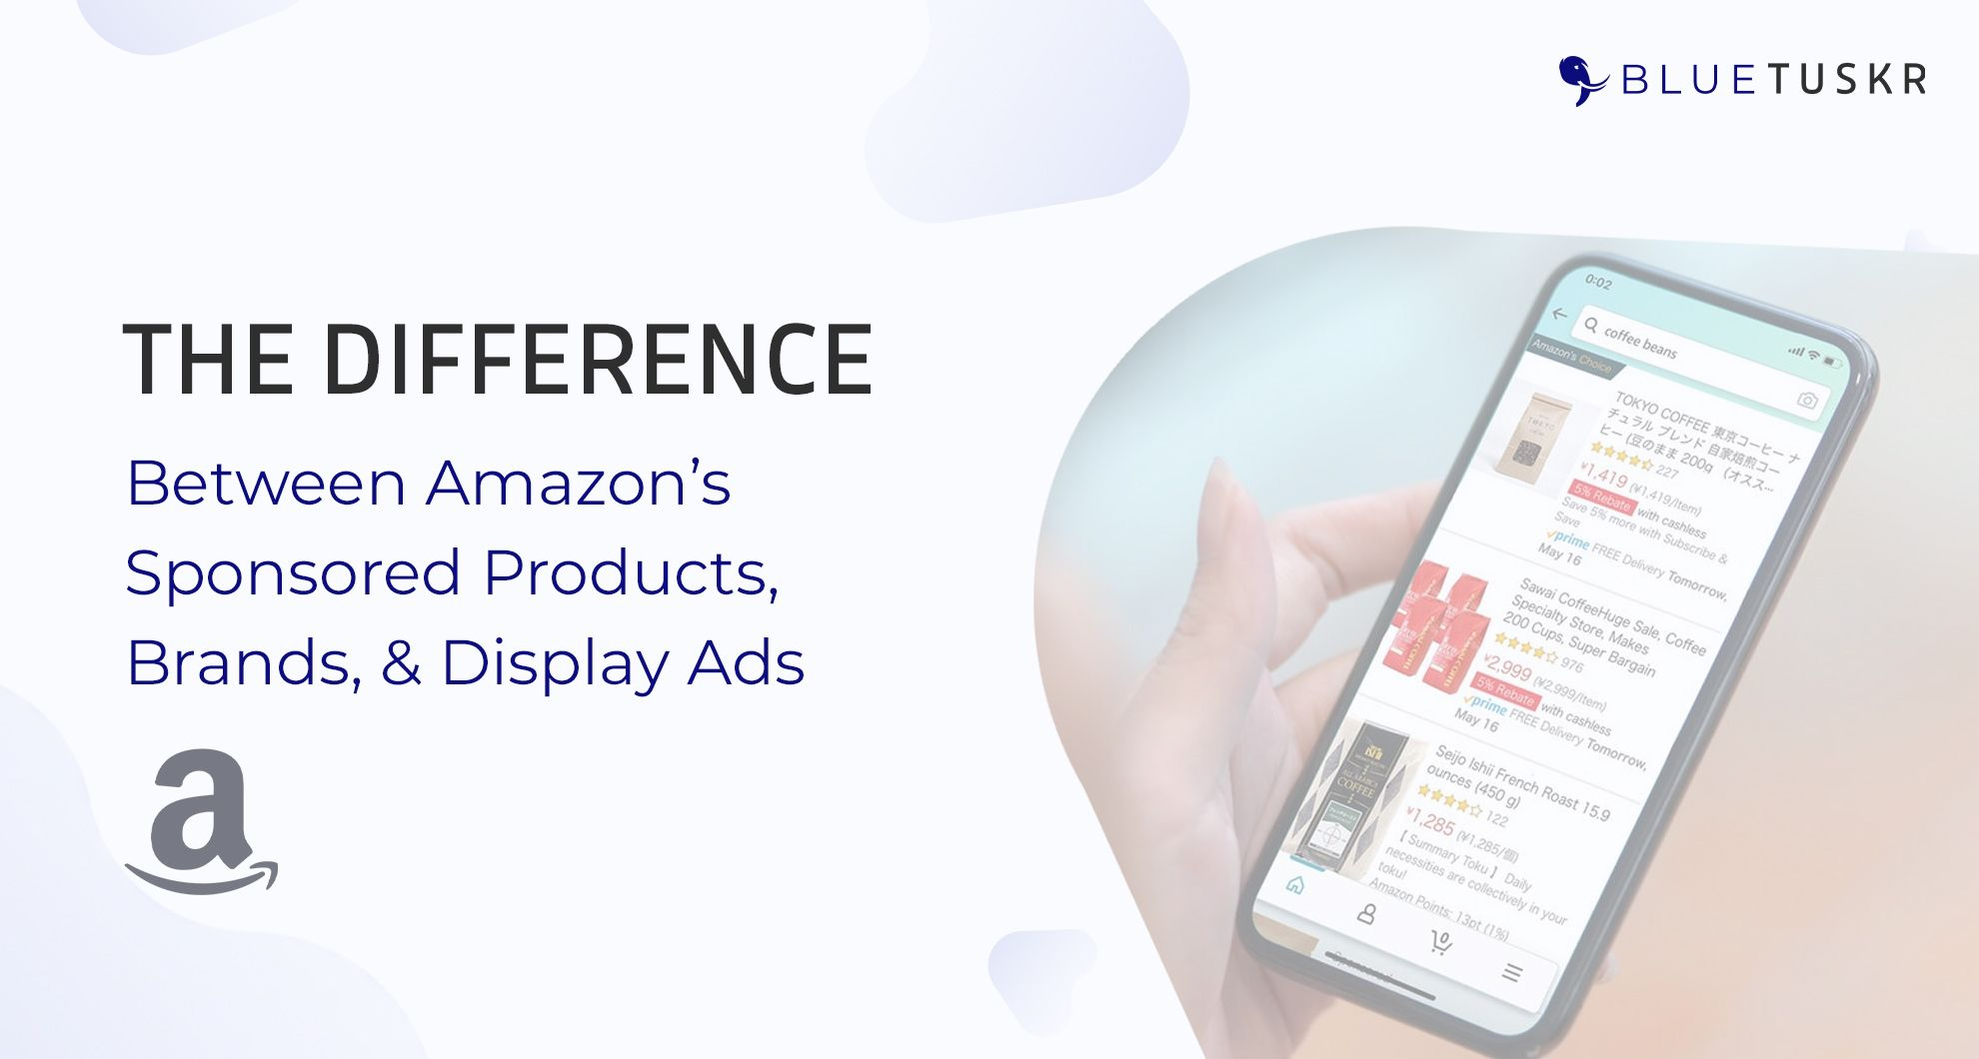 The Difference Between Amazon’s Sponsored Products, Brands, & Display Ads